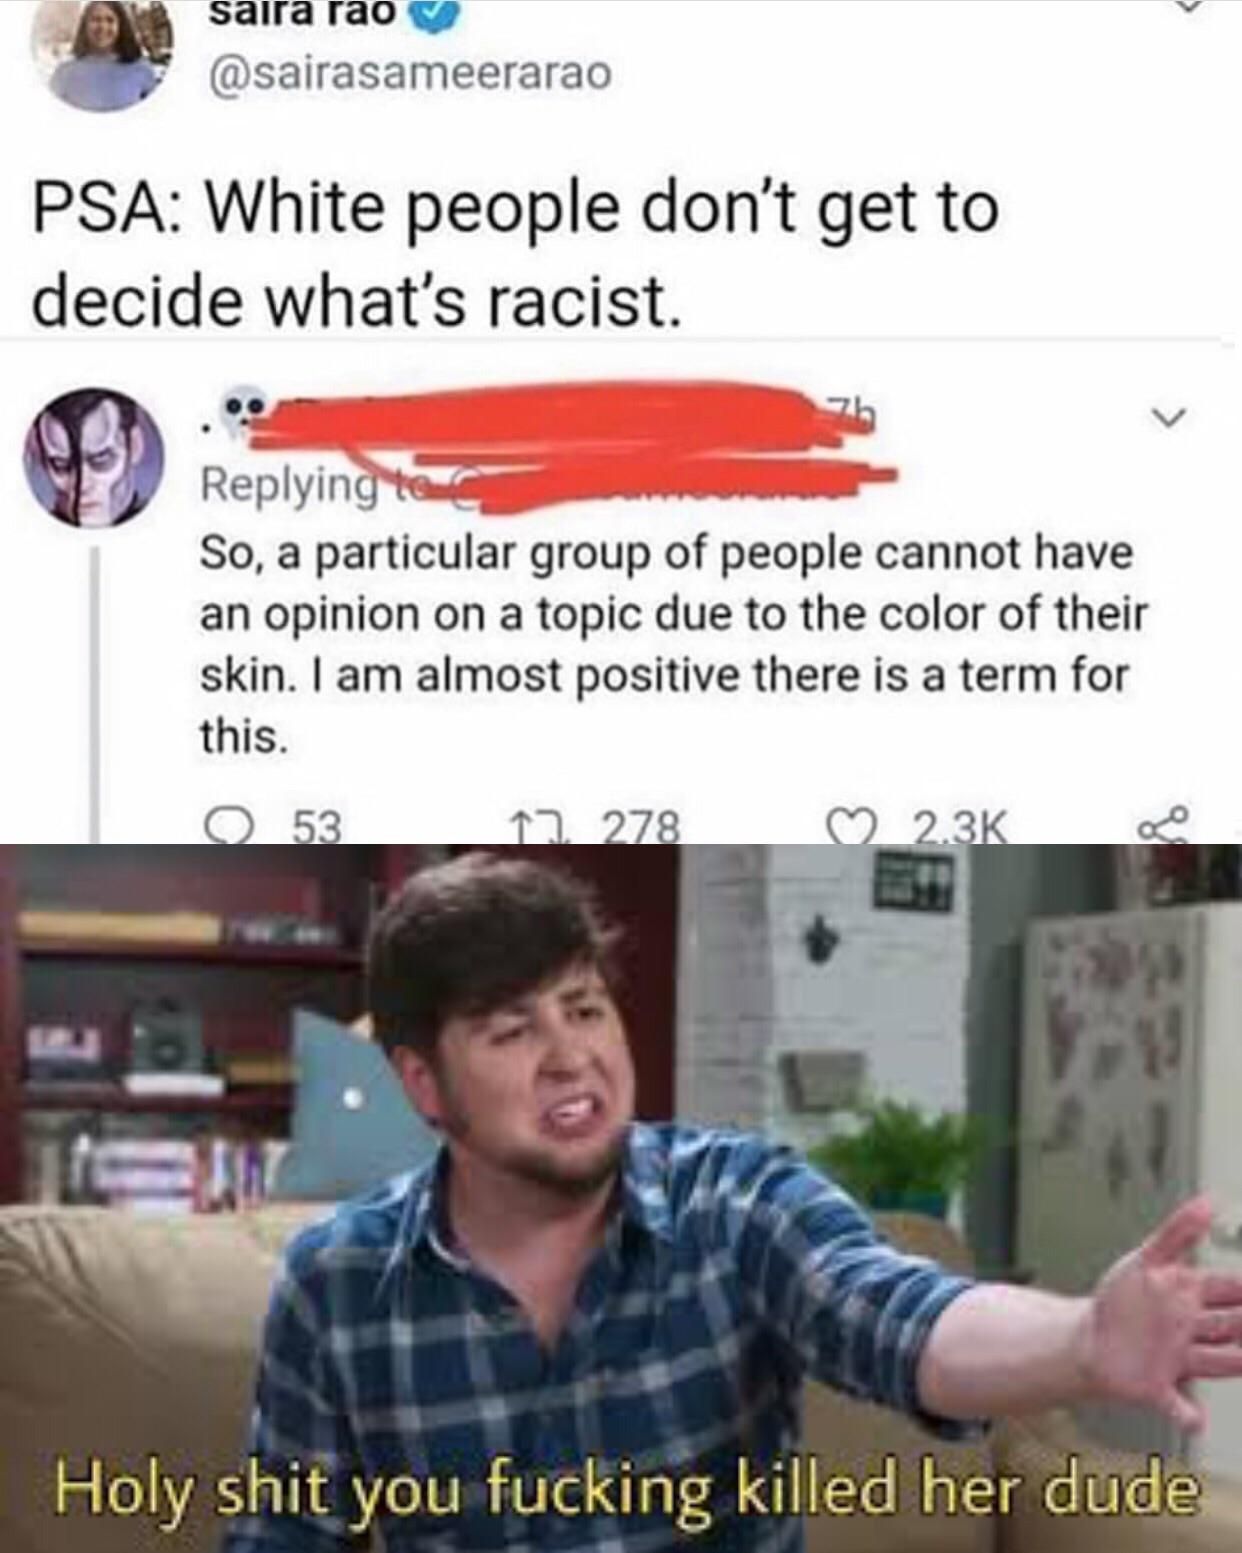 WhITe peOplE Can'T ExpERienCe RaCisM